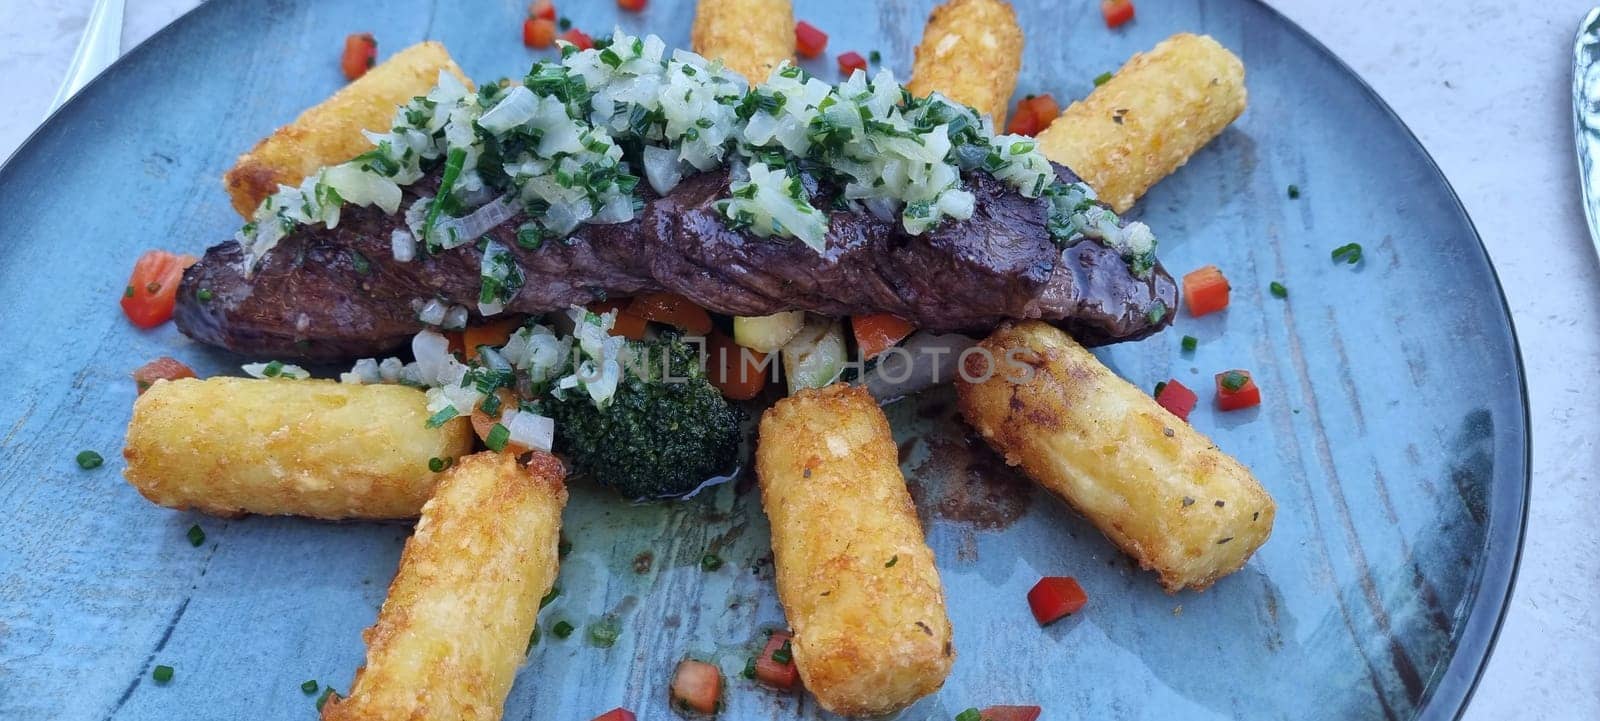 Grilled steak with herb topping served with golden polenta and fresh vegetables on a ceramic plate